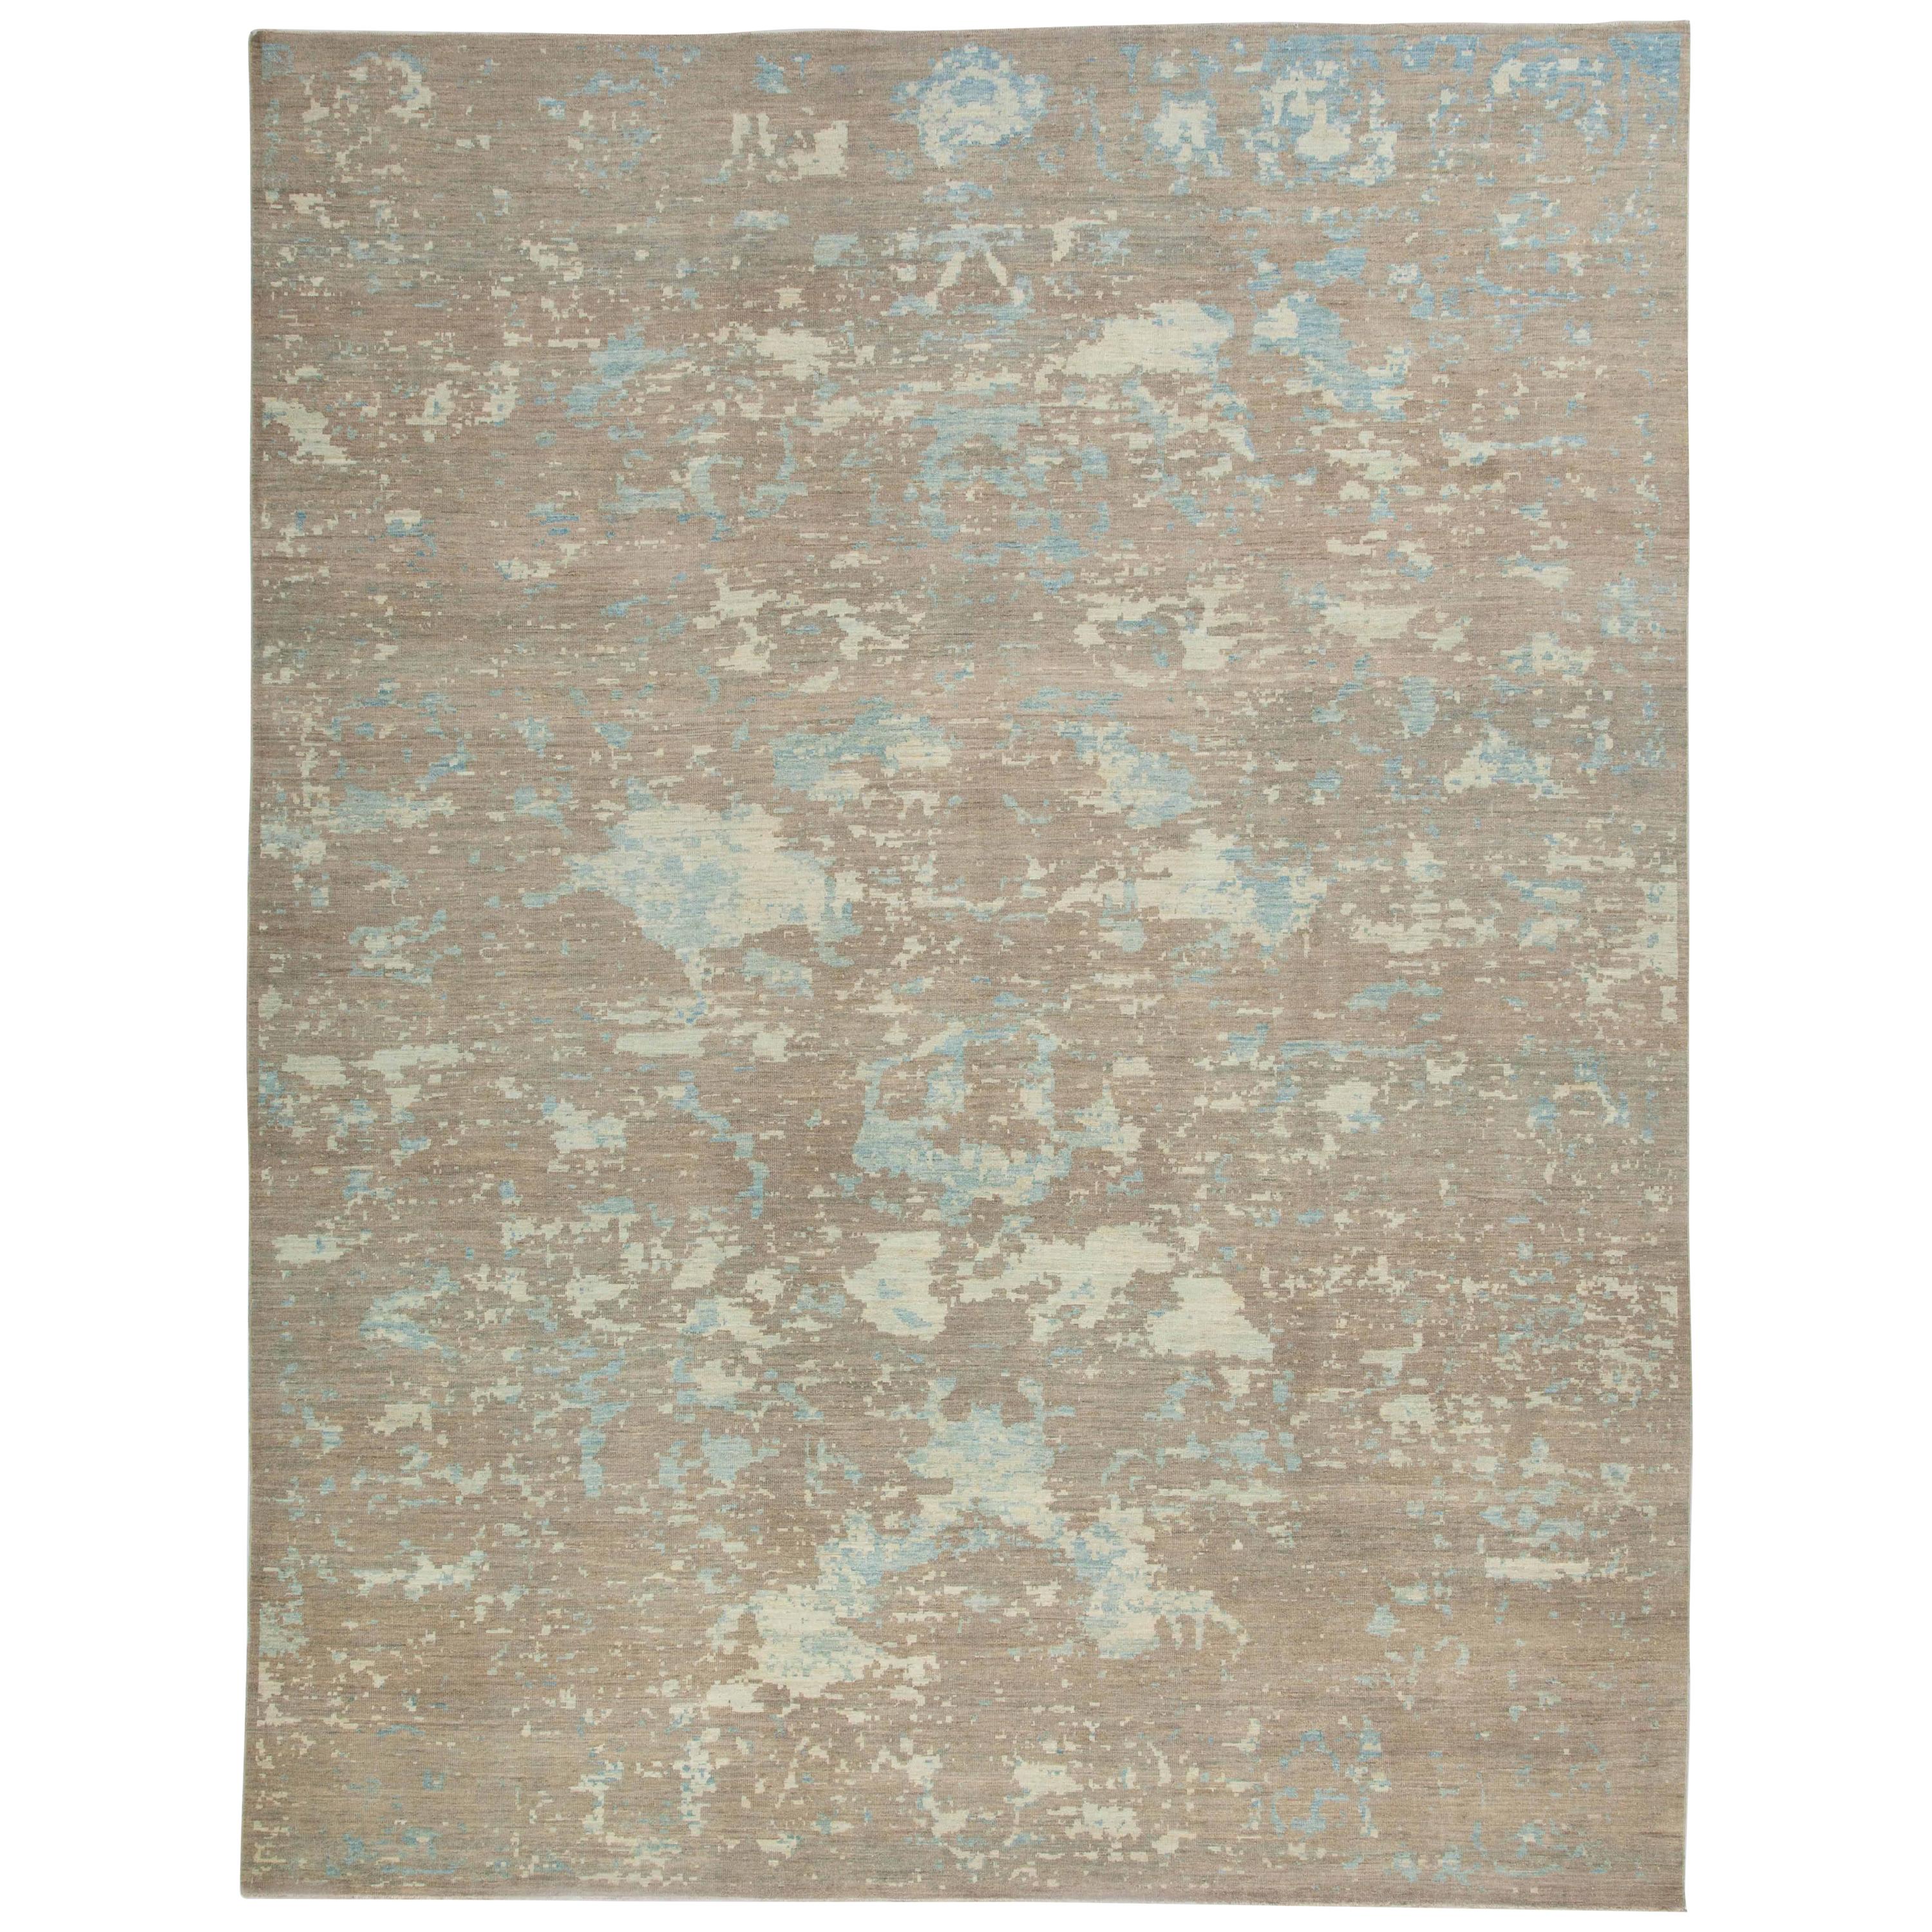  Modern Turkish Sultanabad Rug with Blue and Ivory Floral Details over Beige Fie